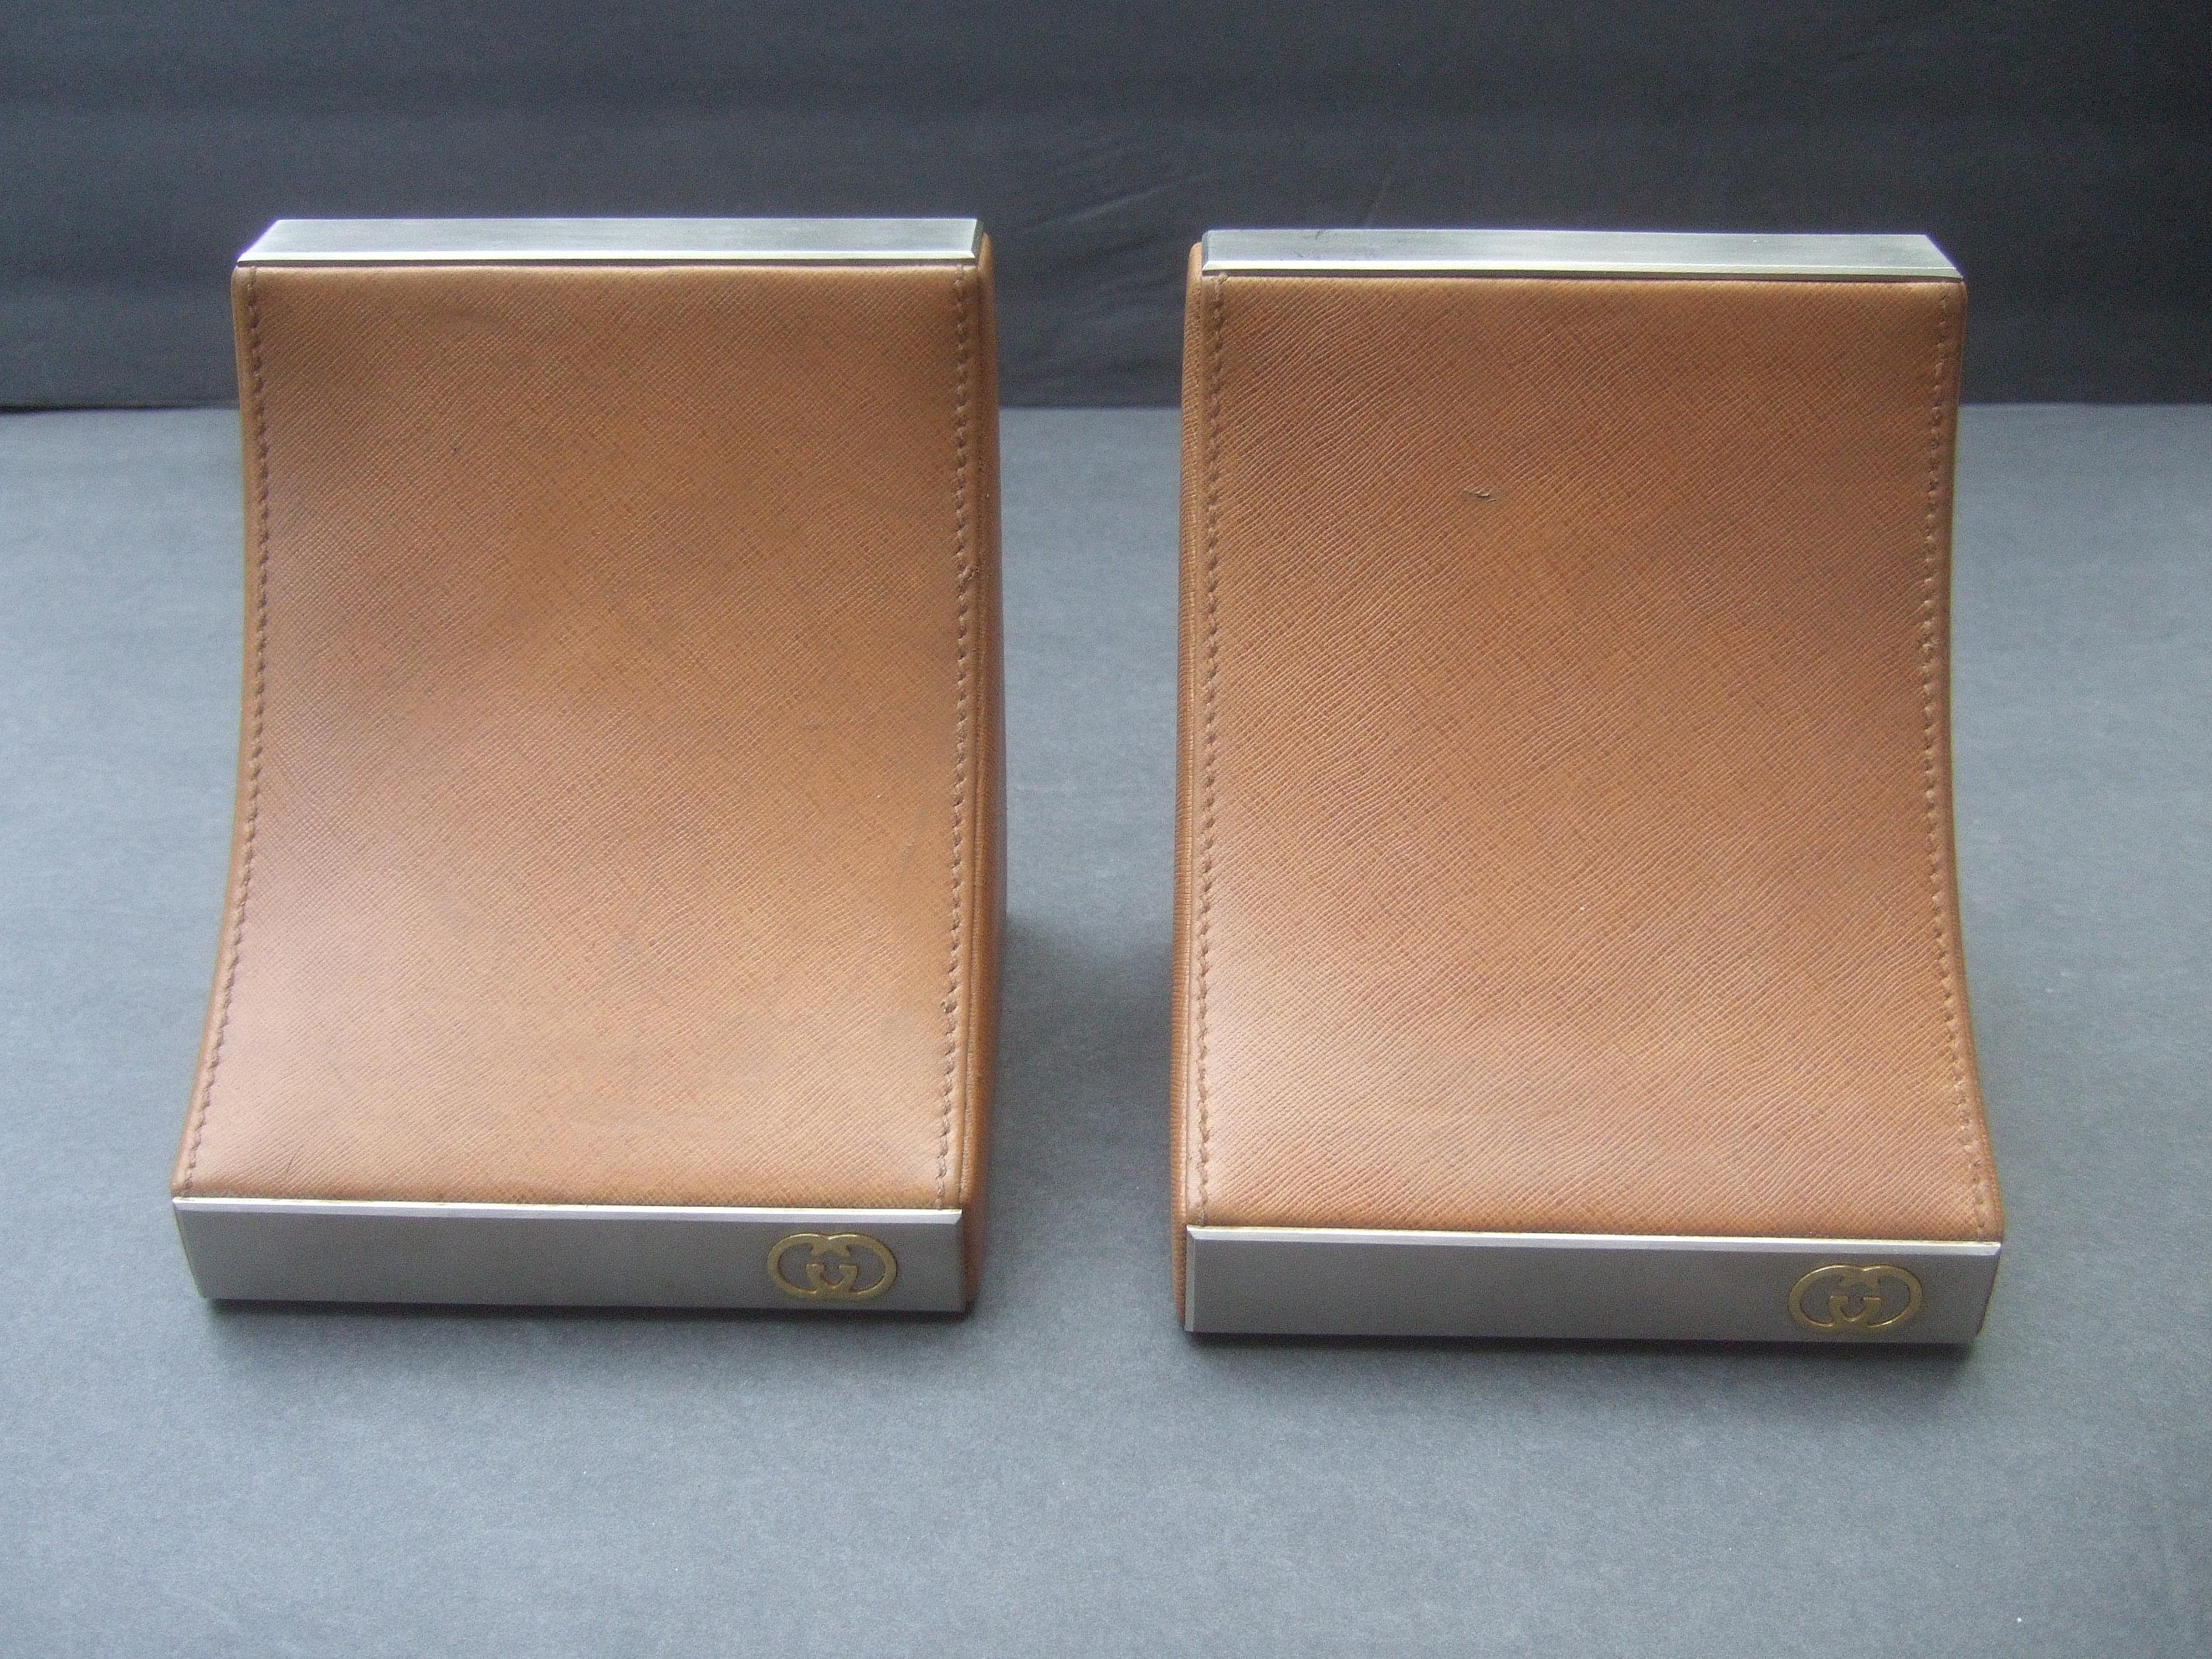 Gucci Italy Rare Caramel Brown Leather Pair of Bookends c 1970s  3